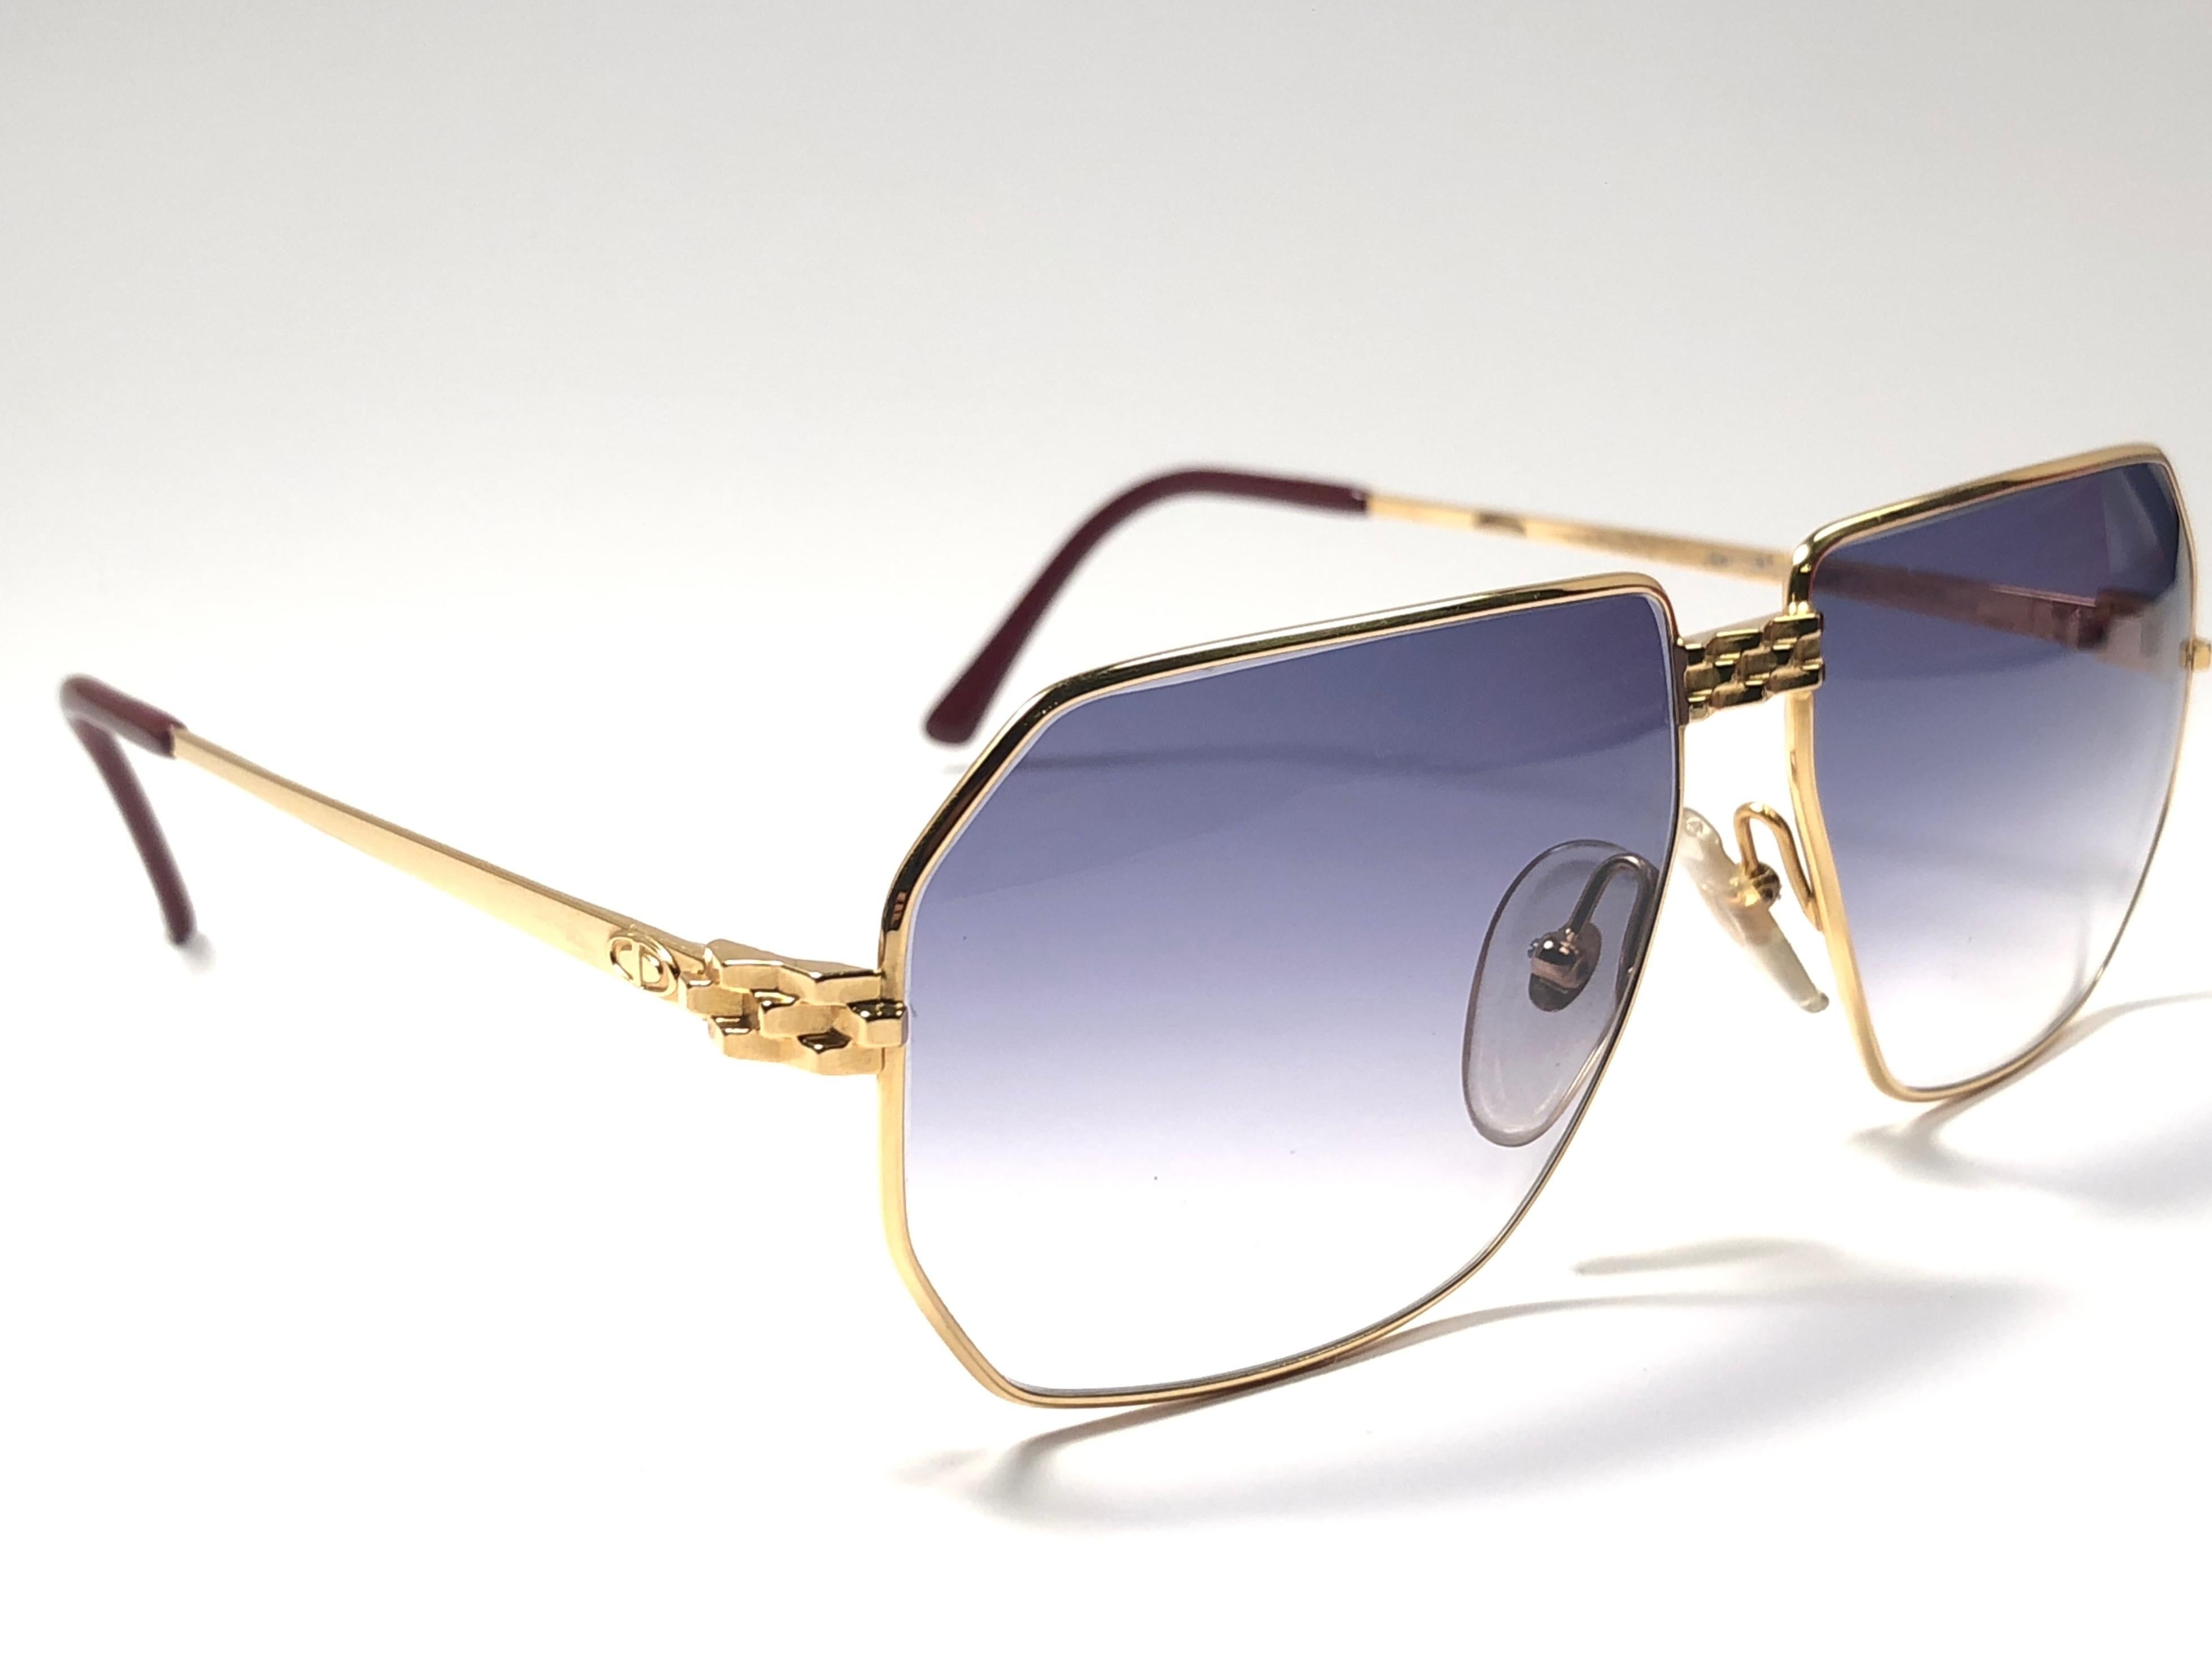 New vintage Christian Dior Monsieur gold details.

Spotless blue gradient lenses.

Comes with it original CD Monsieur sleeve.

New, never worn or displayed this item may show light sign of wear due to storage.

Made in Austria